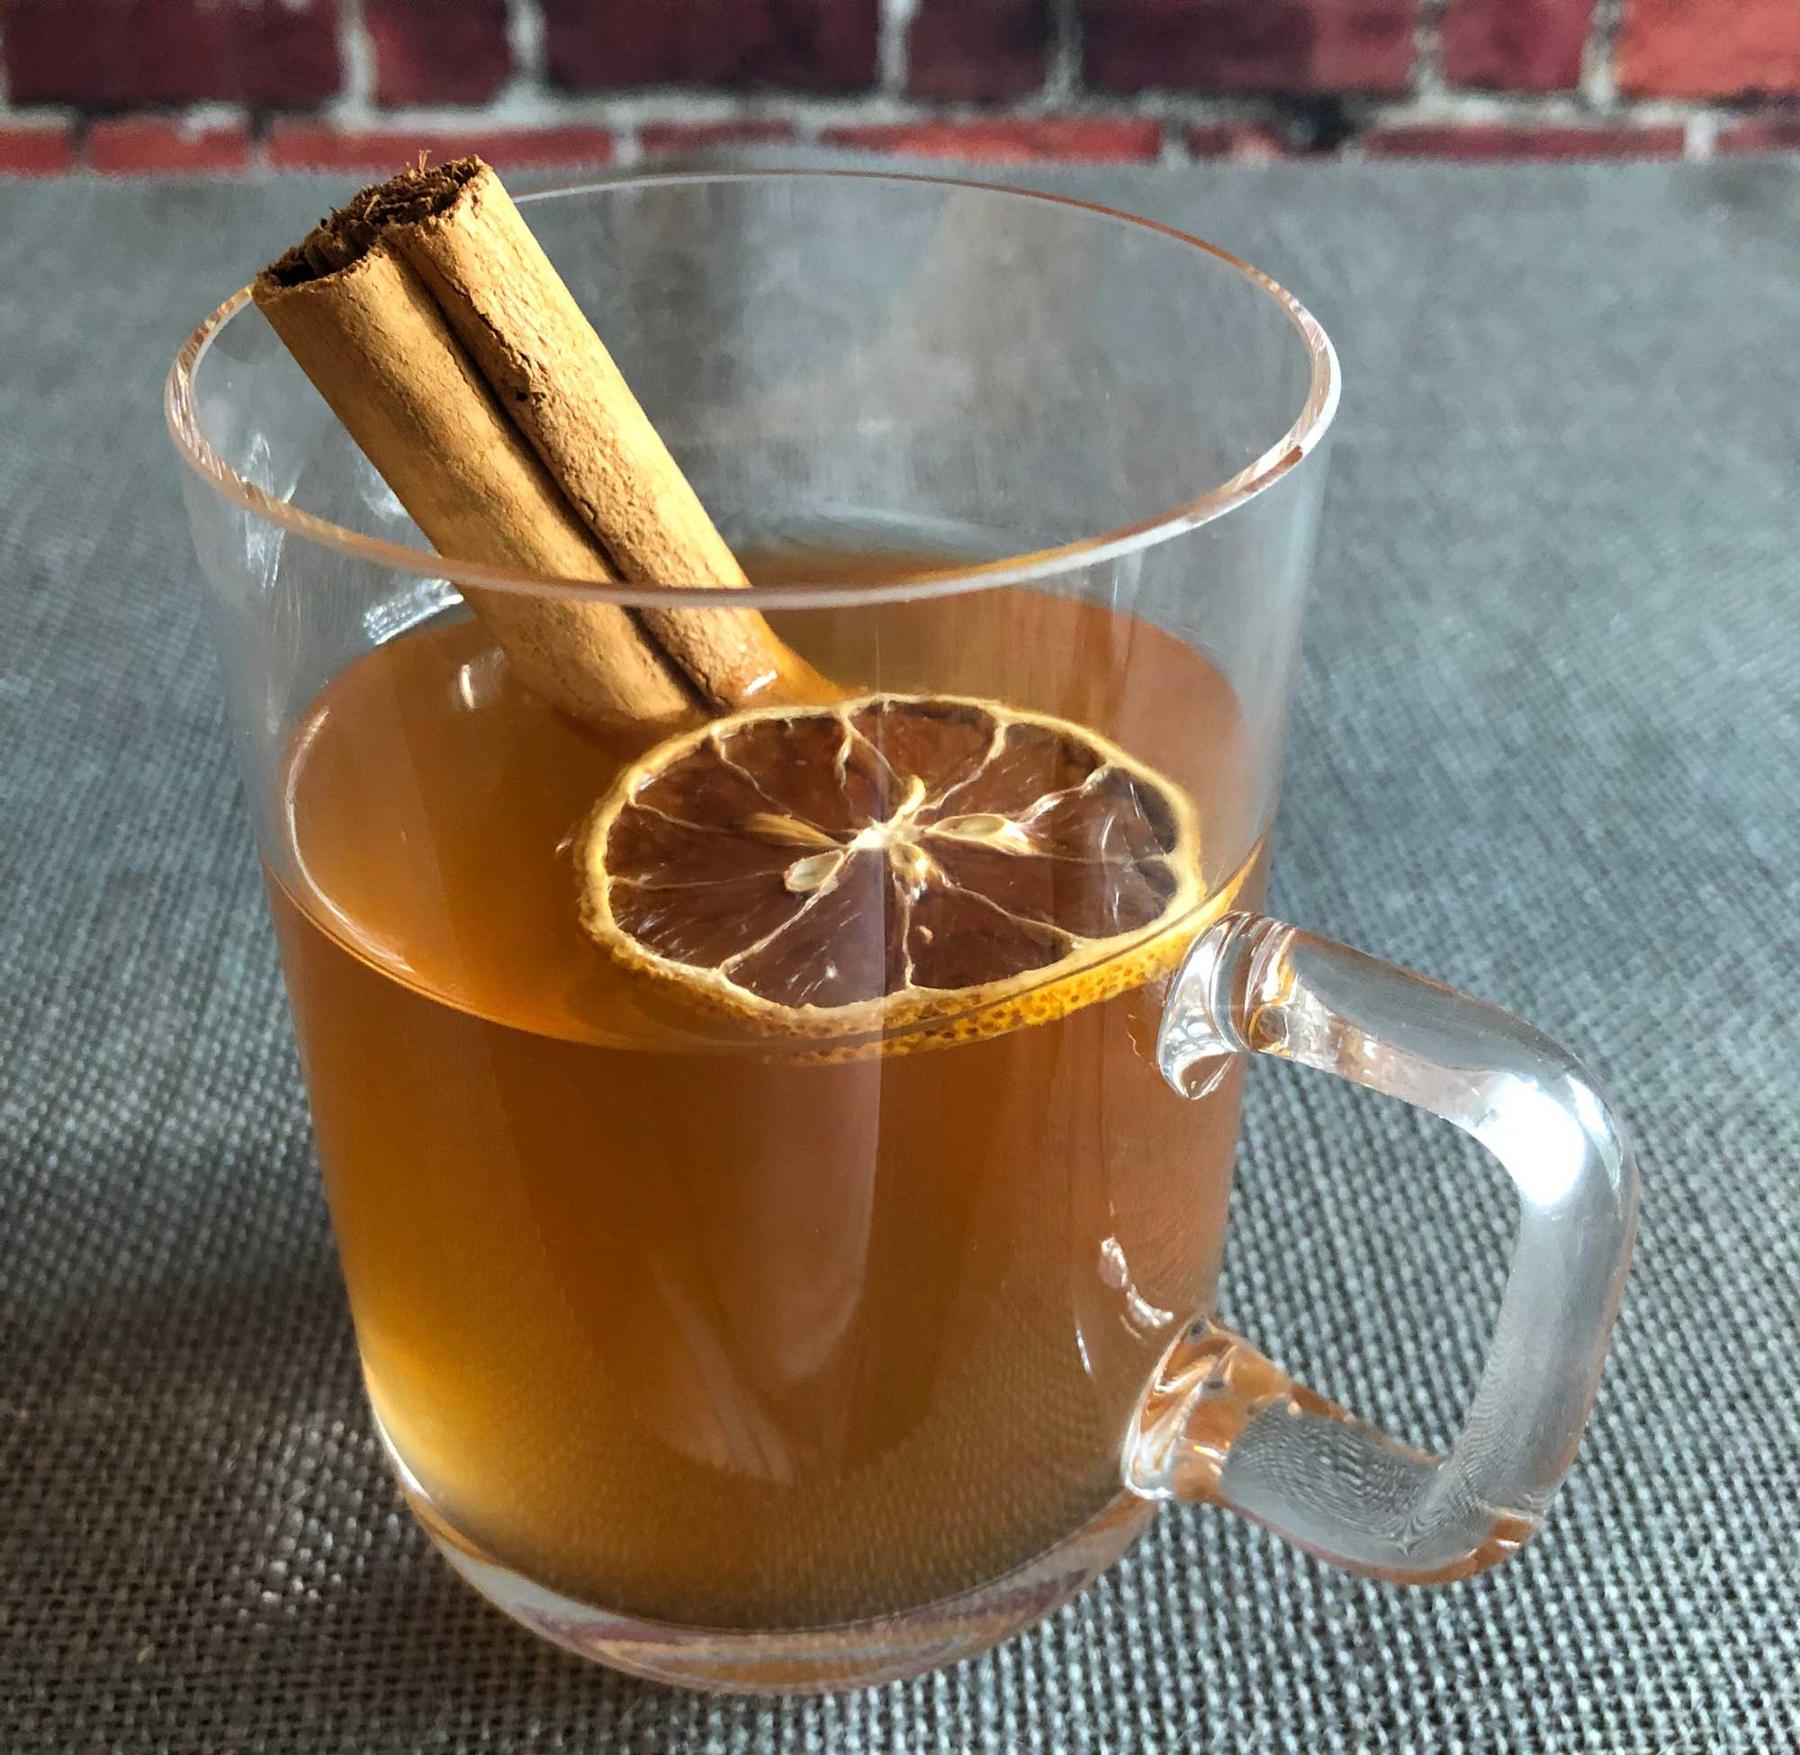 An example of the Flurries on East Bay Street, the mixed drink (drink) featuring hot water, Henriques & Henriques Generoso Doce 5 Year Old Madeira, bourbon whiskey, lemon juice, sugar, and cinnamon stick; photo by Lee Edwards